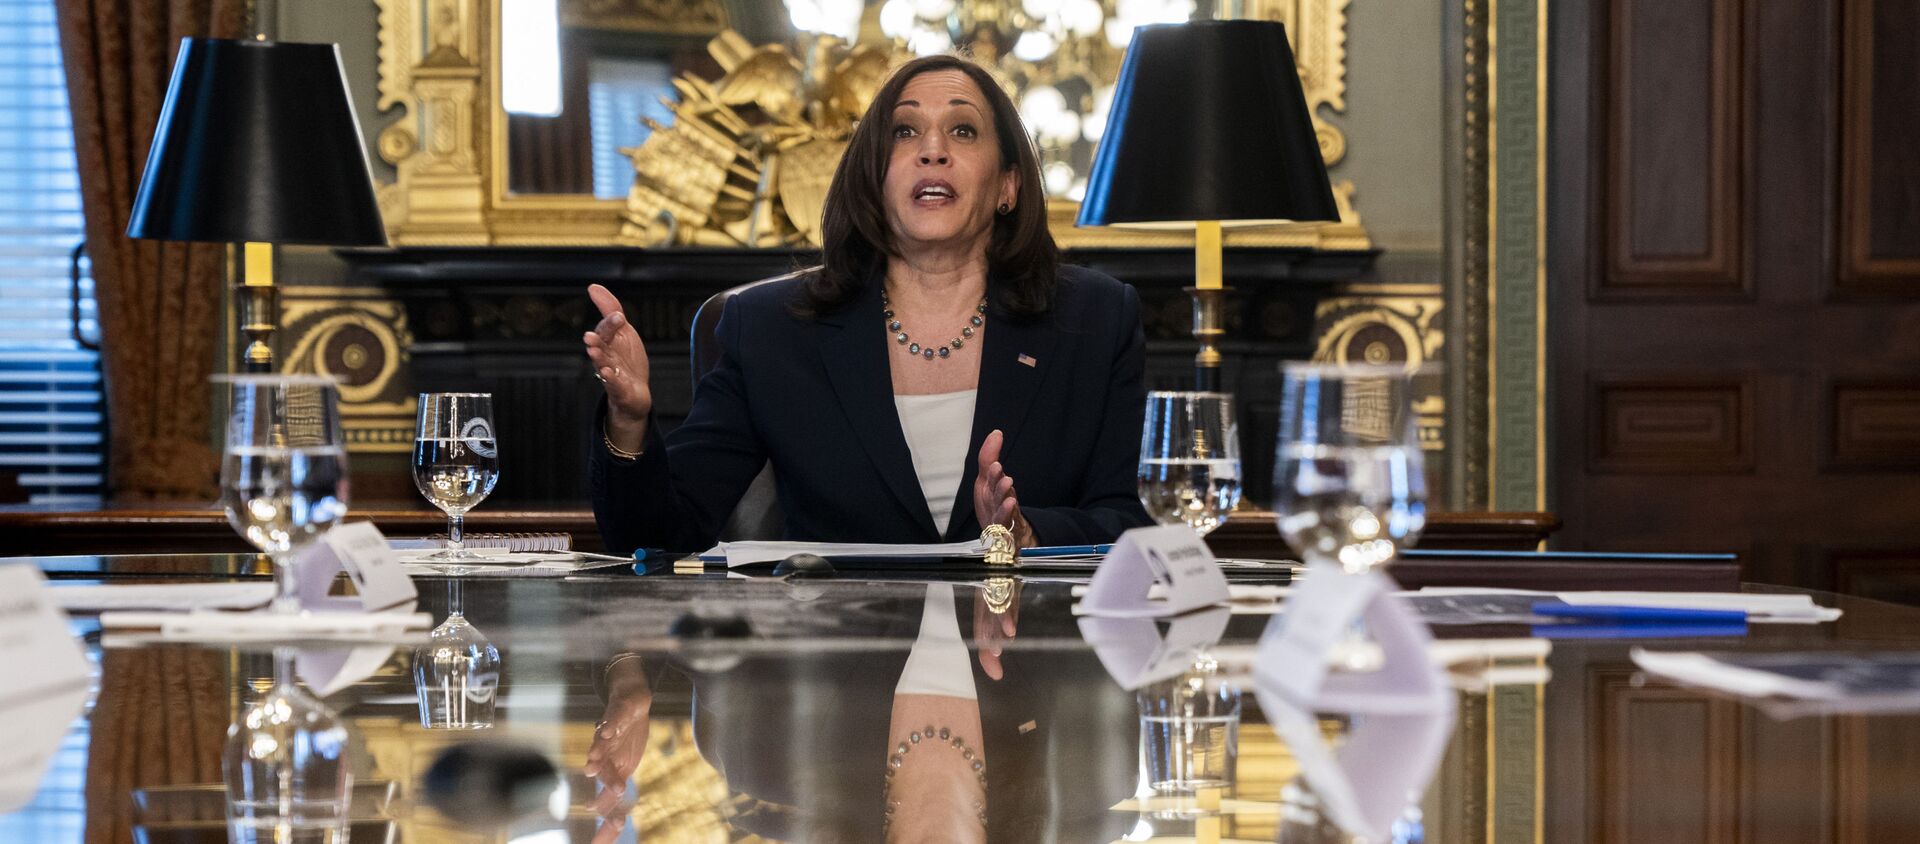 Vice President Kamala Harris is reflected in a table as she speaks during the inaugural meeting of the Task Force on Worker Organizing and Empowerment, in Harris' ceremonial office, Thursday, May 13, 2021, on the White House complex in Washington - Sputnik International, 1920, 02.06.2021